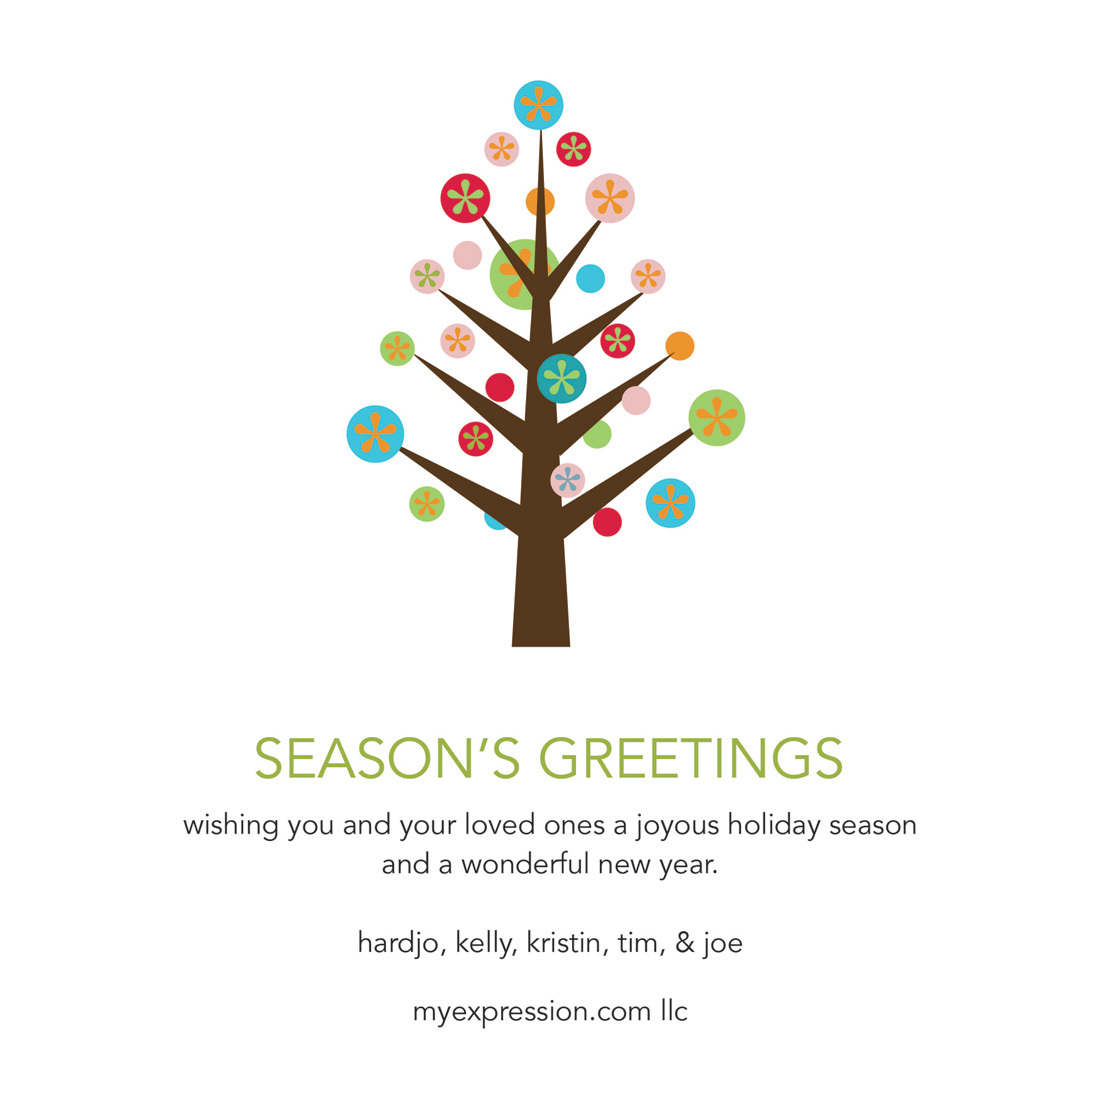 Special Season Greeting Party Invitations